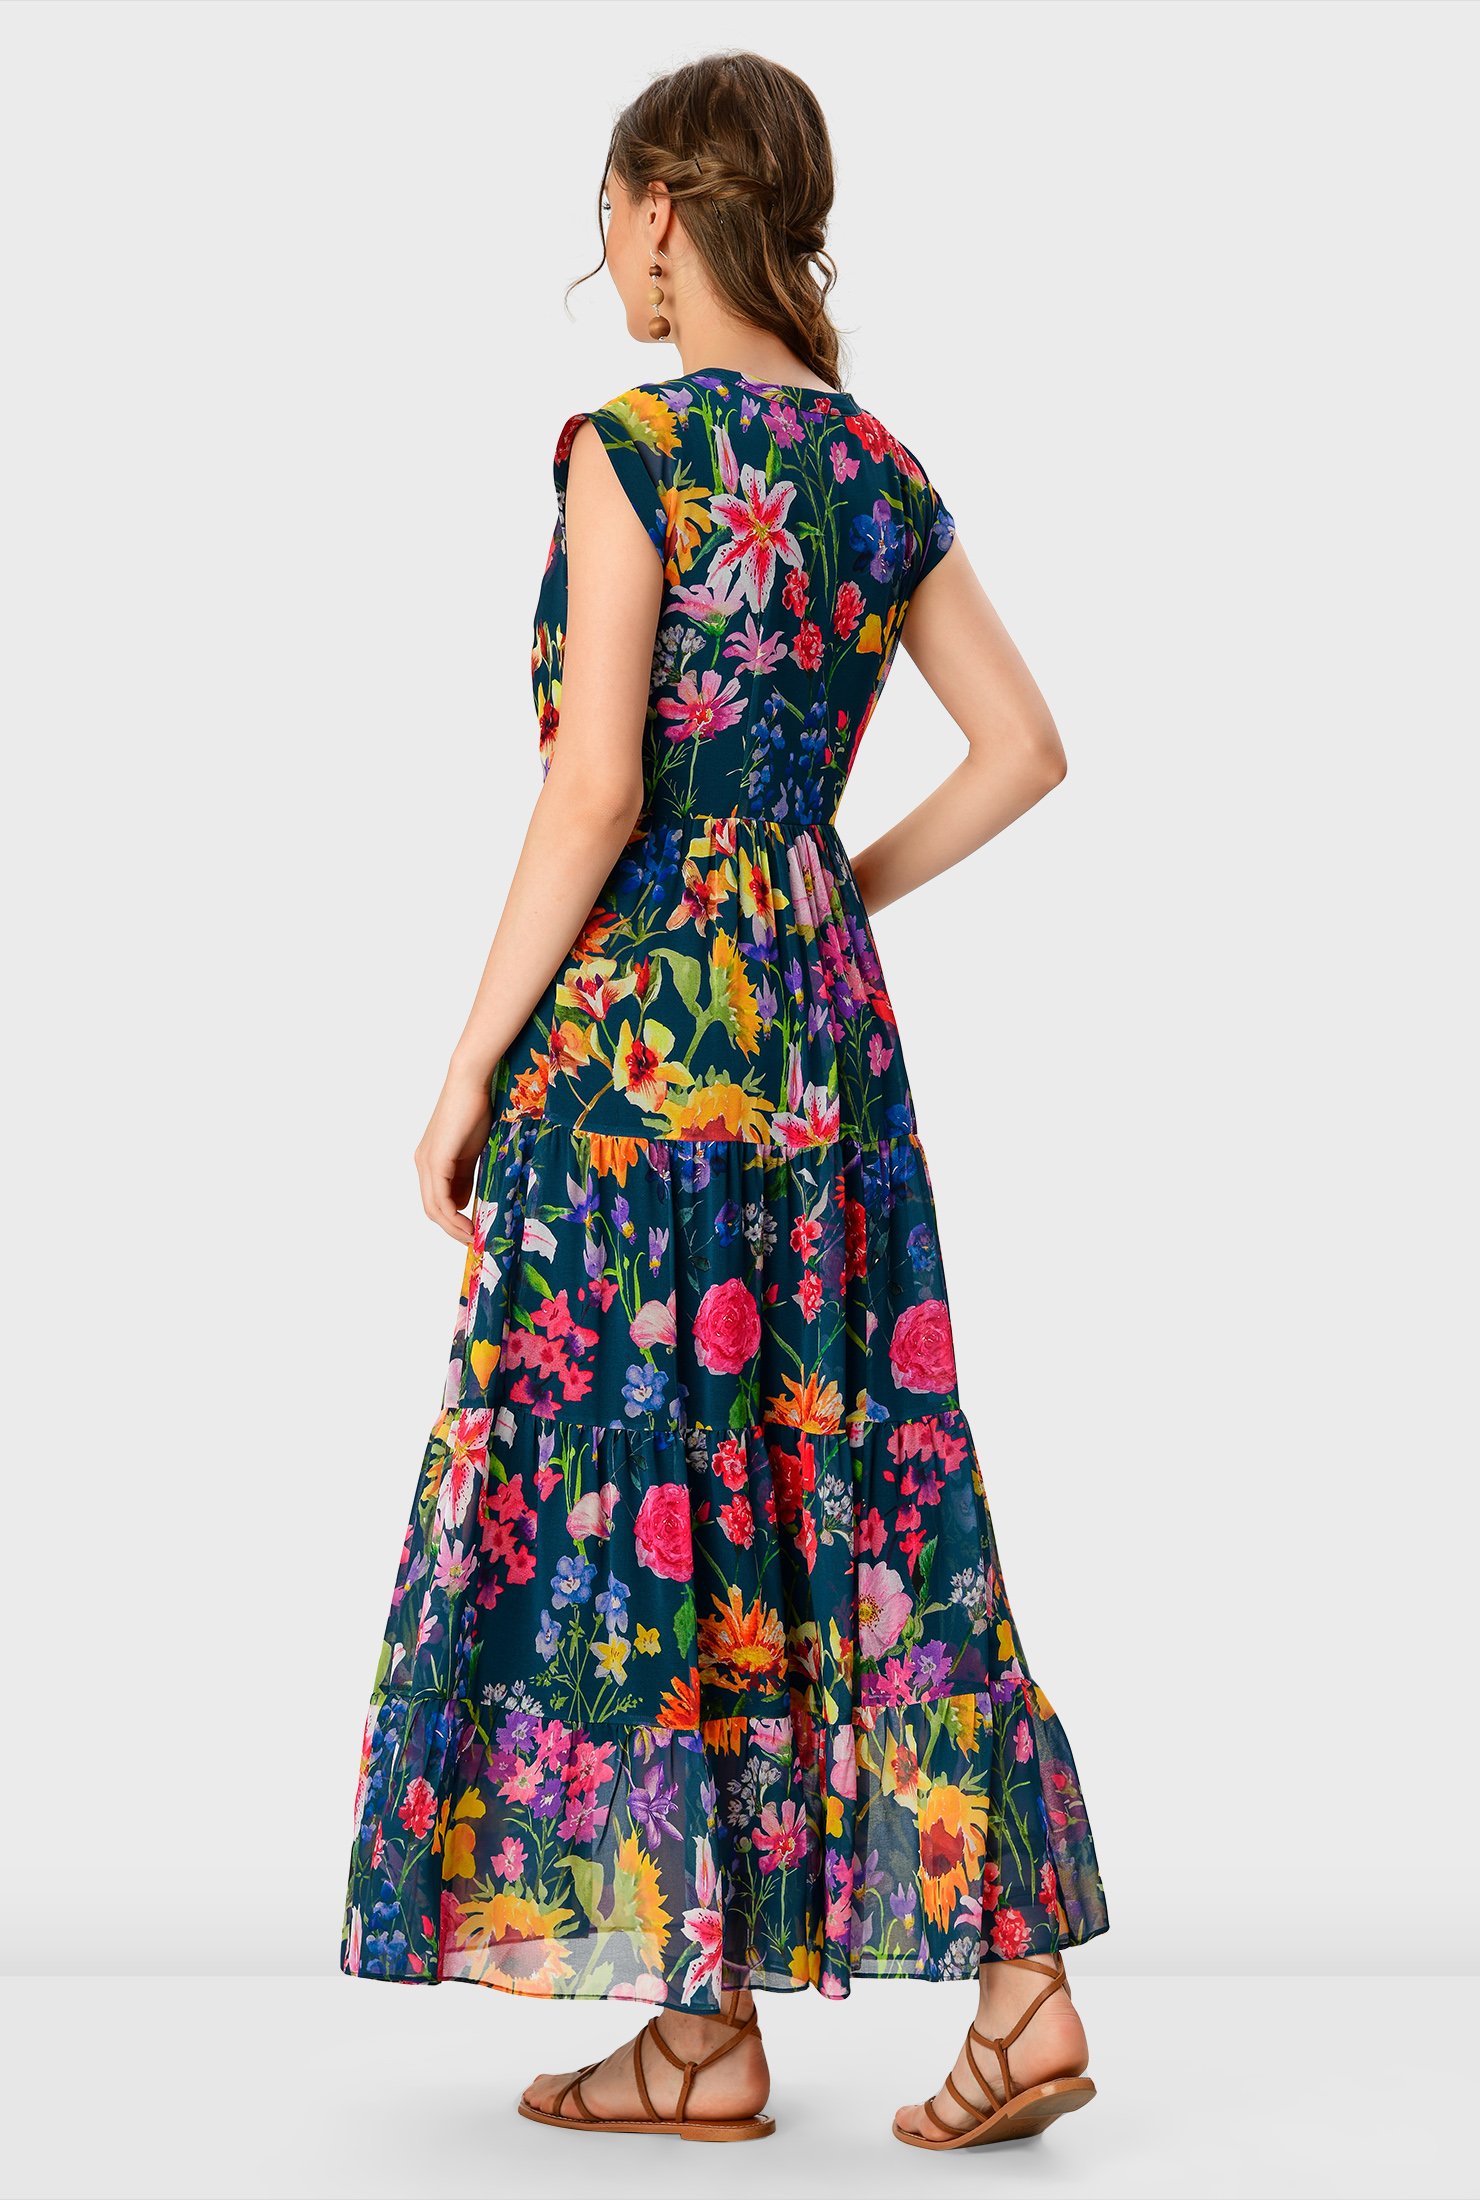 Let's wander and wonder in colorful-petaled florals and a breezy silhouette, everything you need to twirl in summer! Our floral-print georgette dress features ruched tiers at the skirt in a longer length that swirls beautifully as you move.